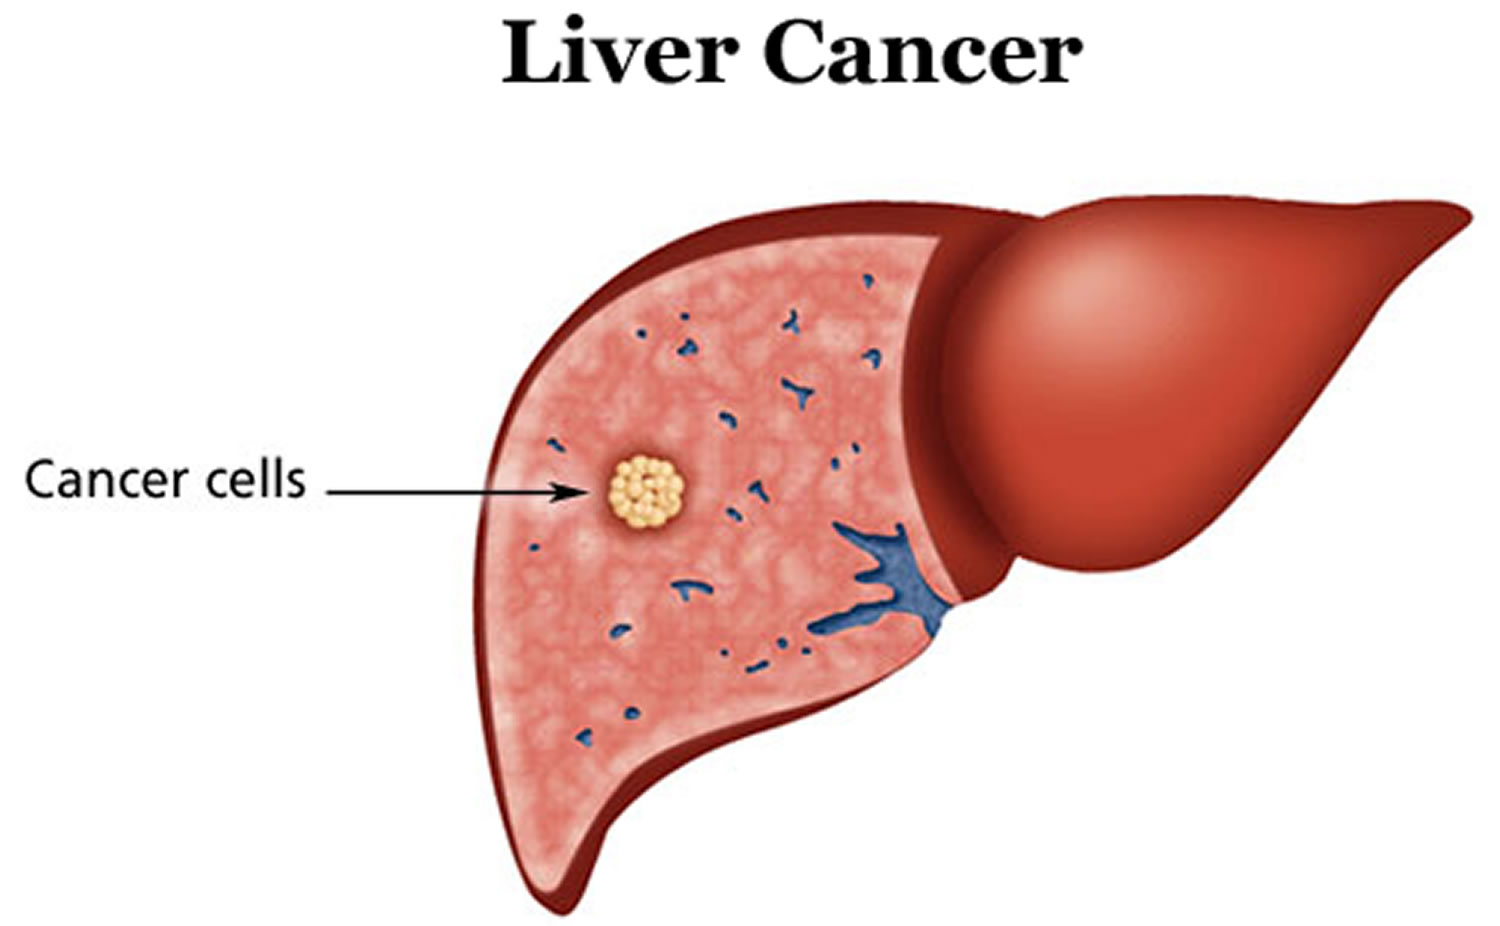 Symptoms and treatment of liver cancer